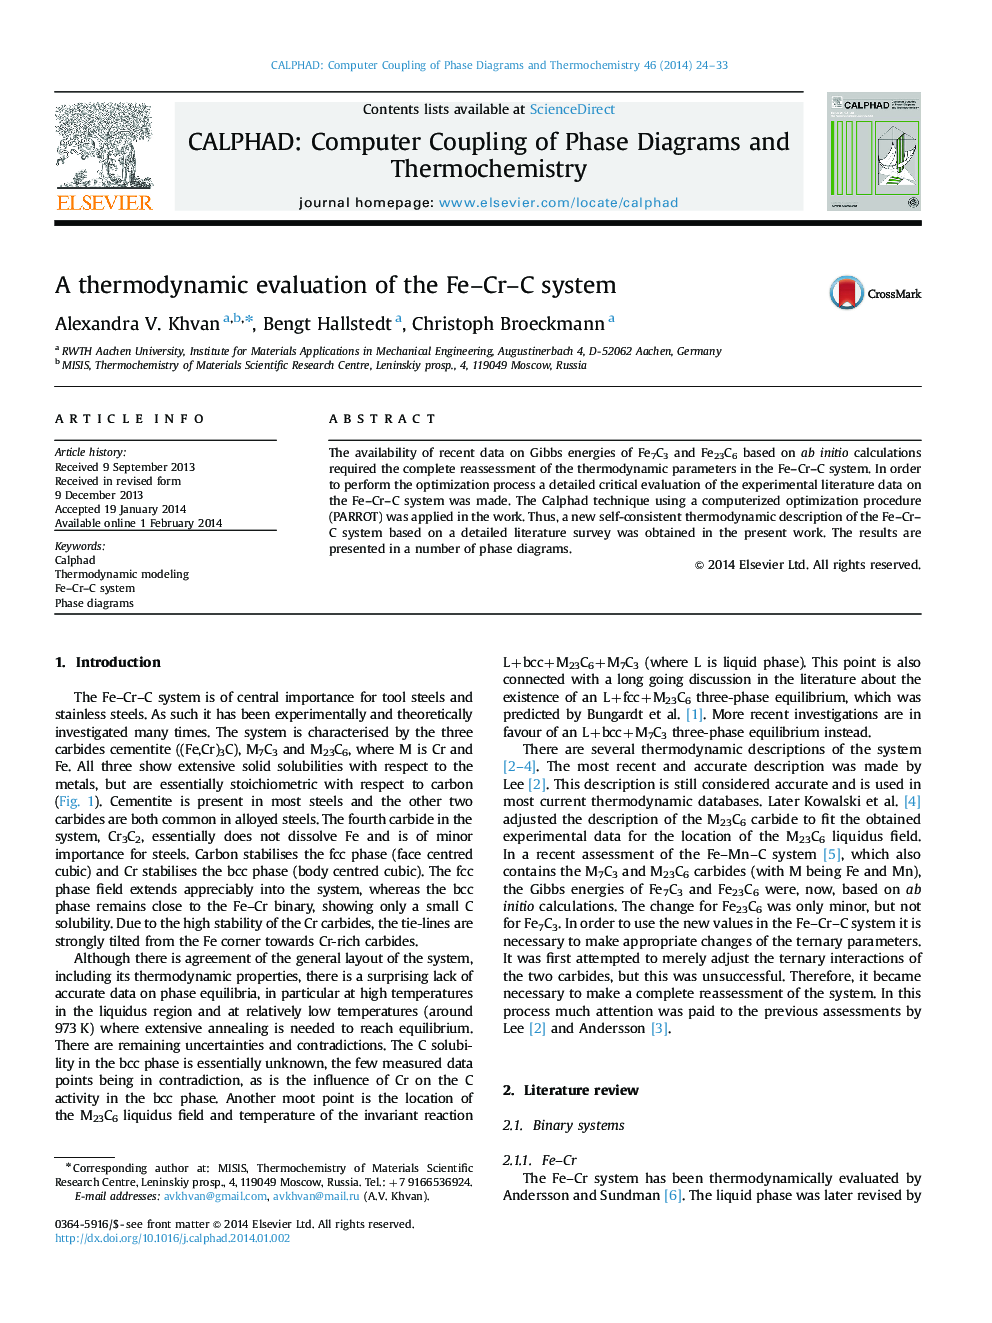 A thermodynamic evaluation of the Fe–Cr–C system